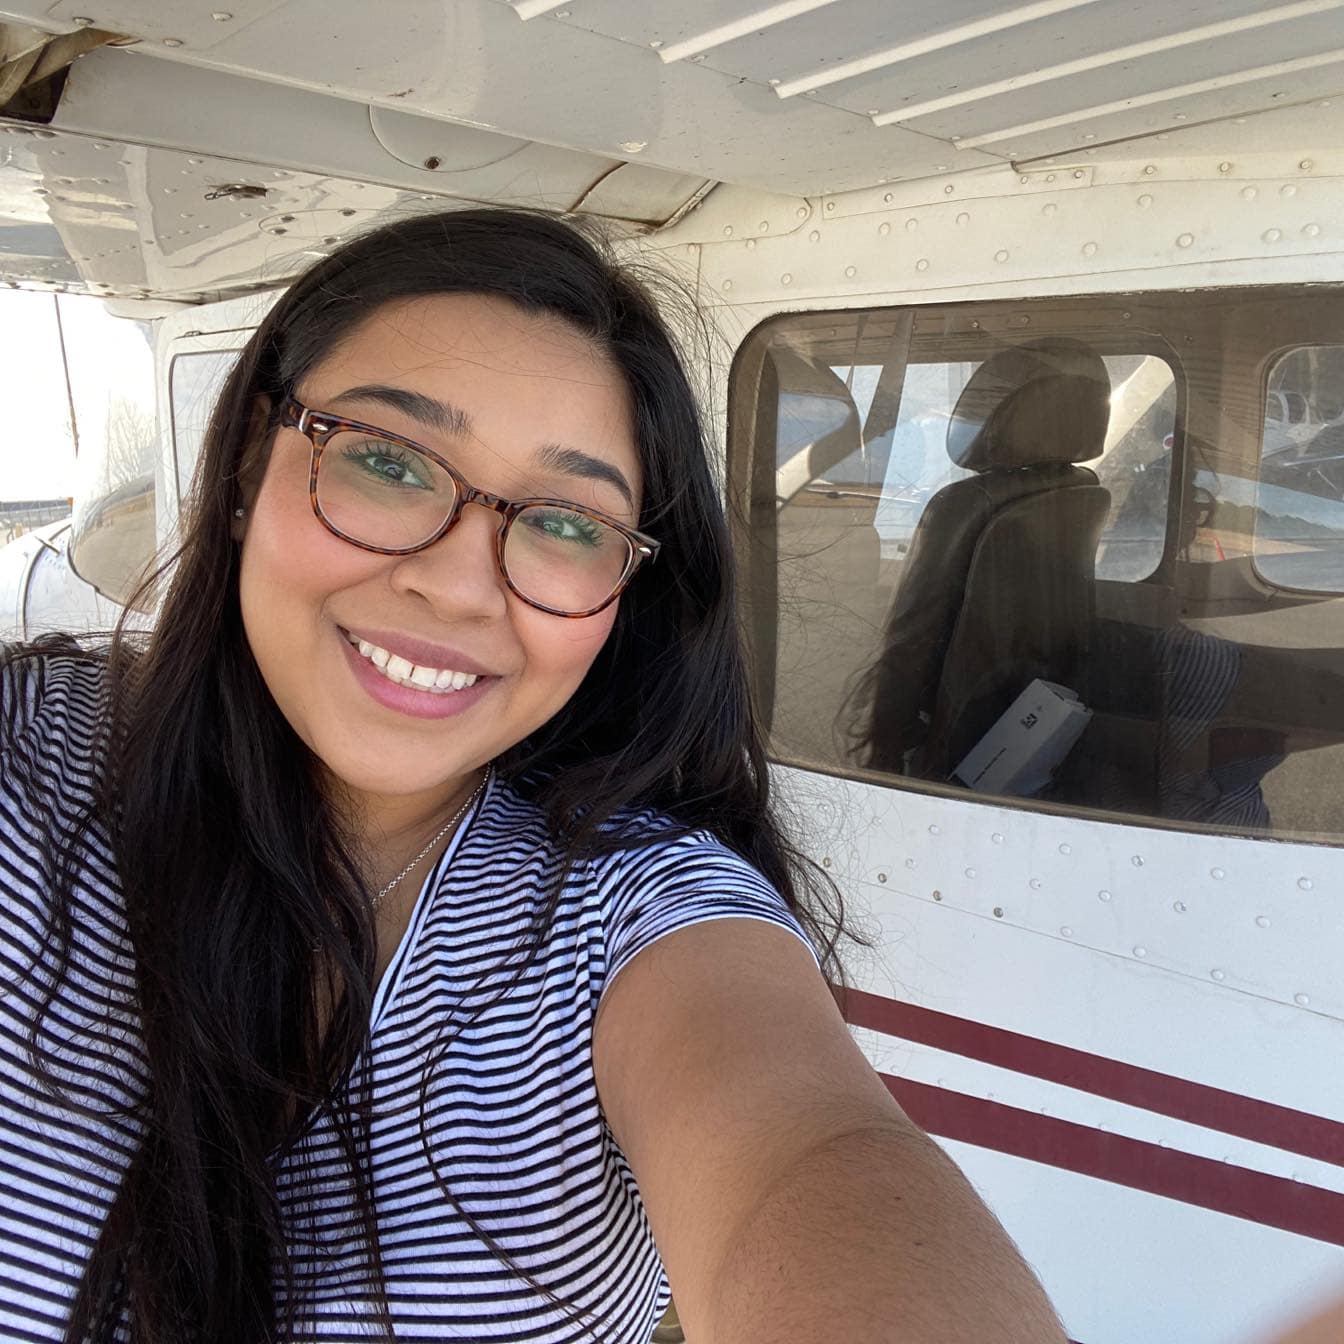 Marily Aguilar-Hernandez stands by a plane